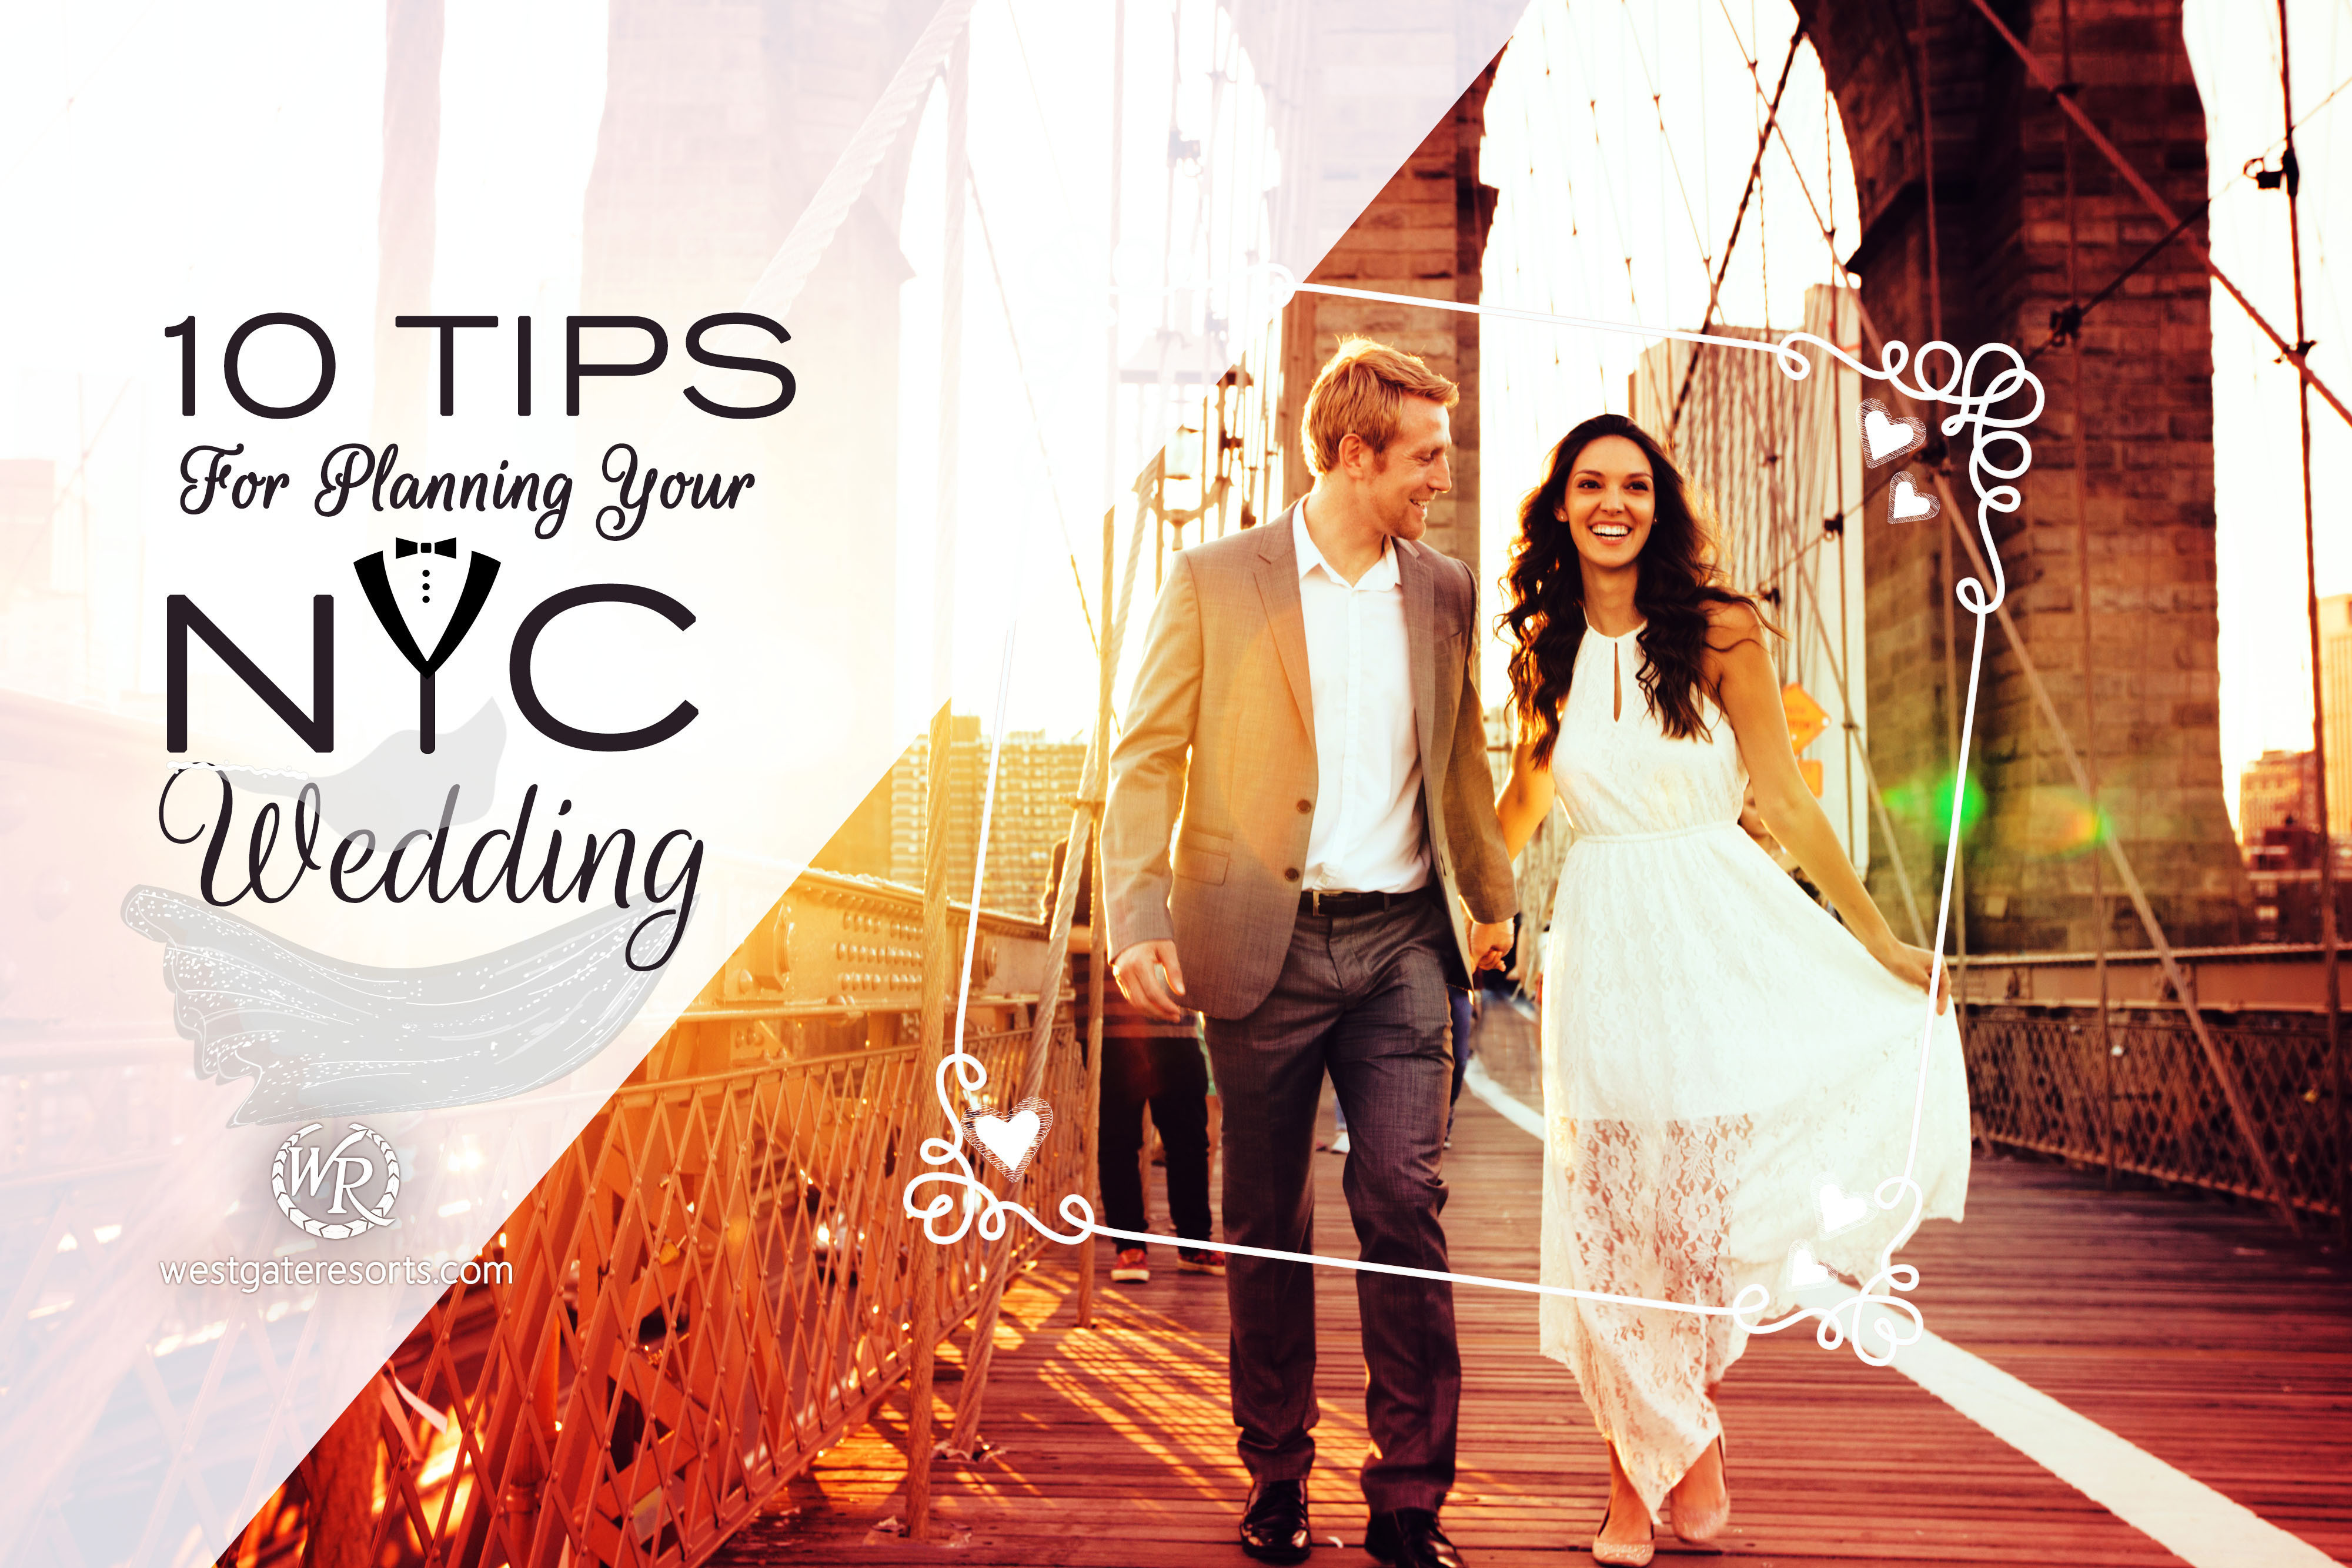 10 Tips for Planning Your NYC Wedding with a Memorable ‘I Do’